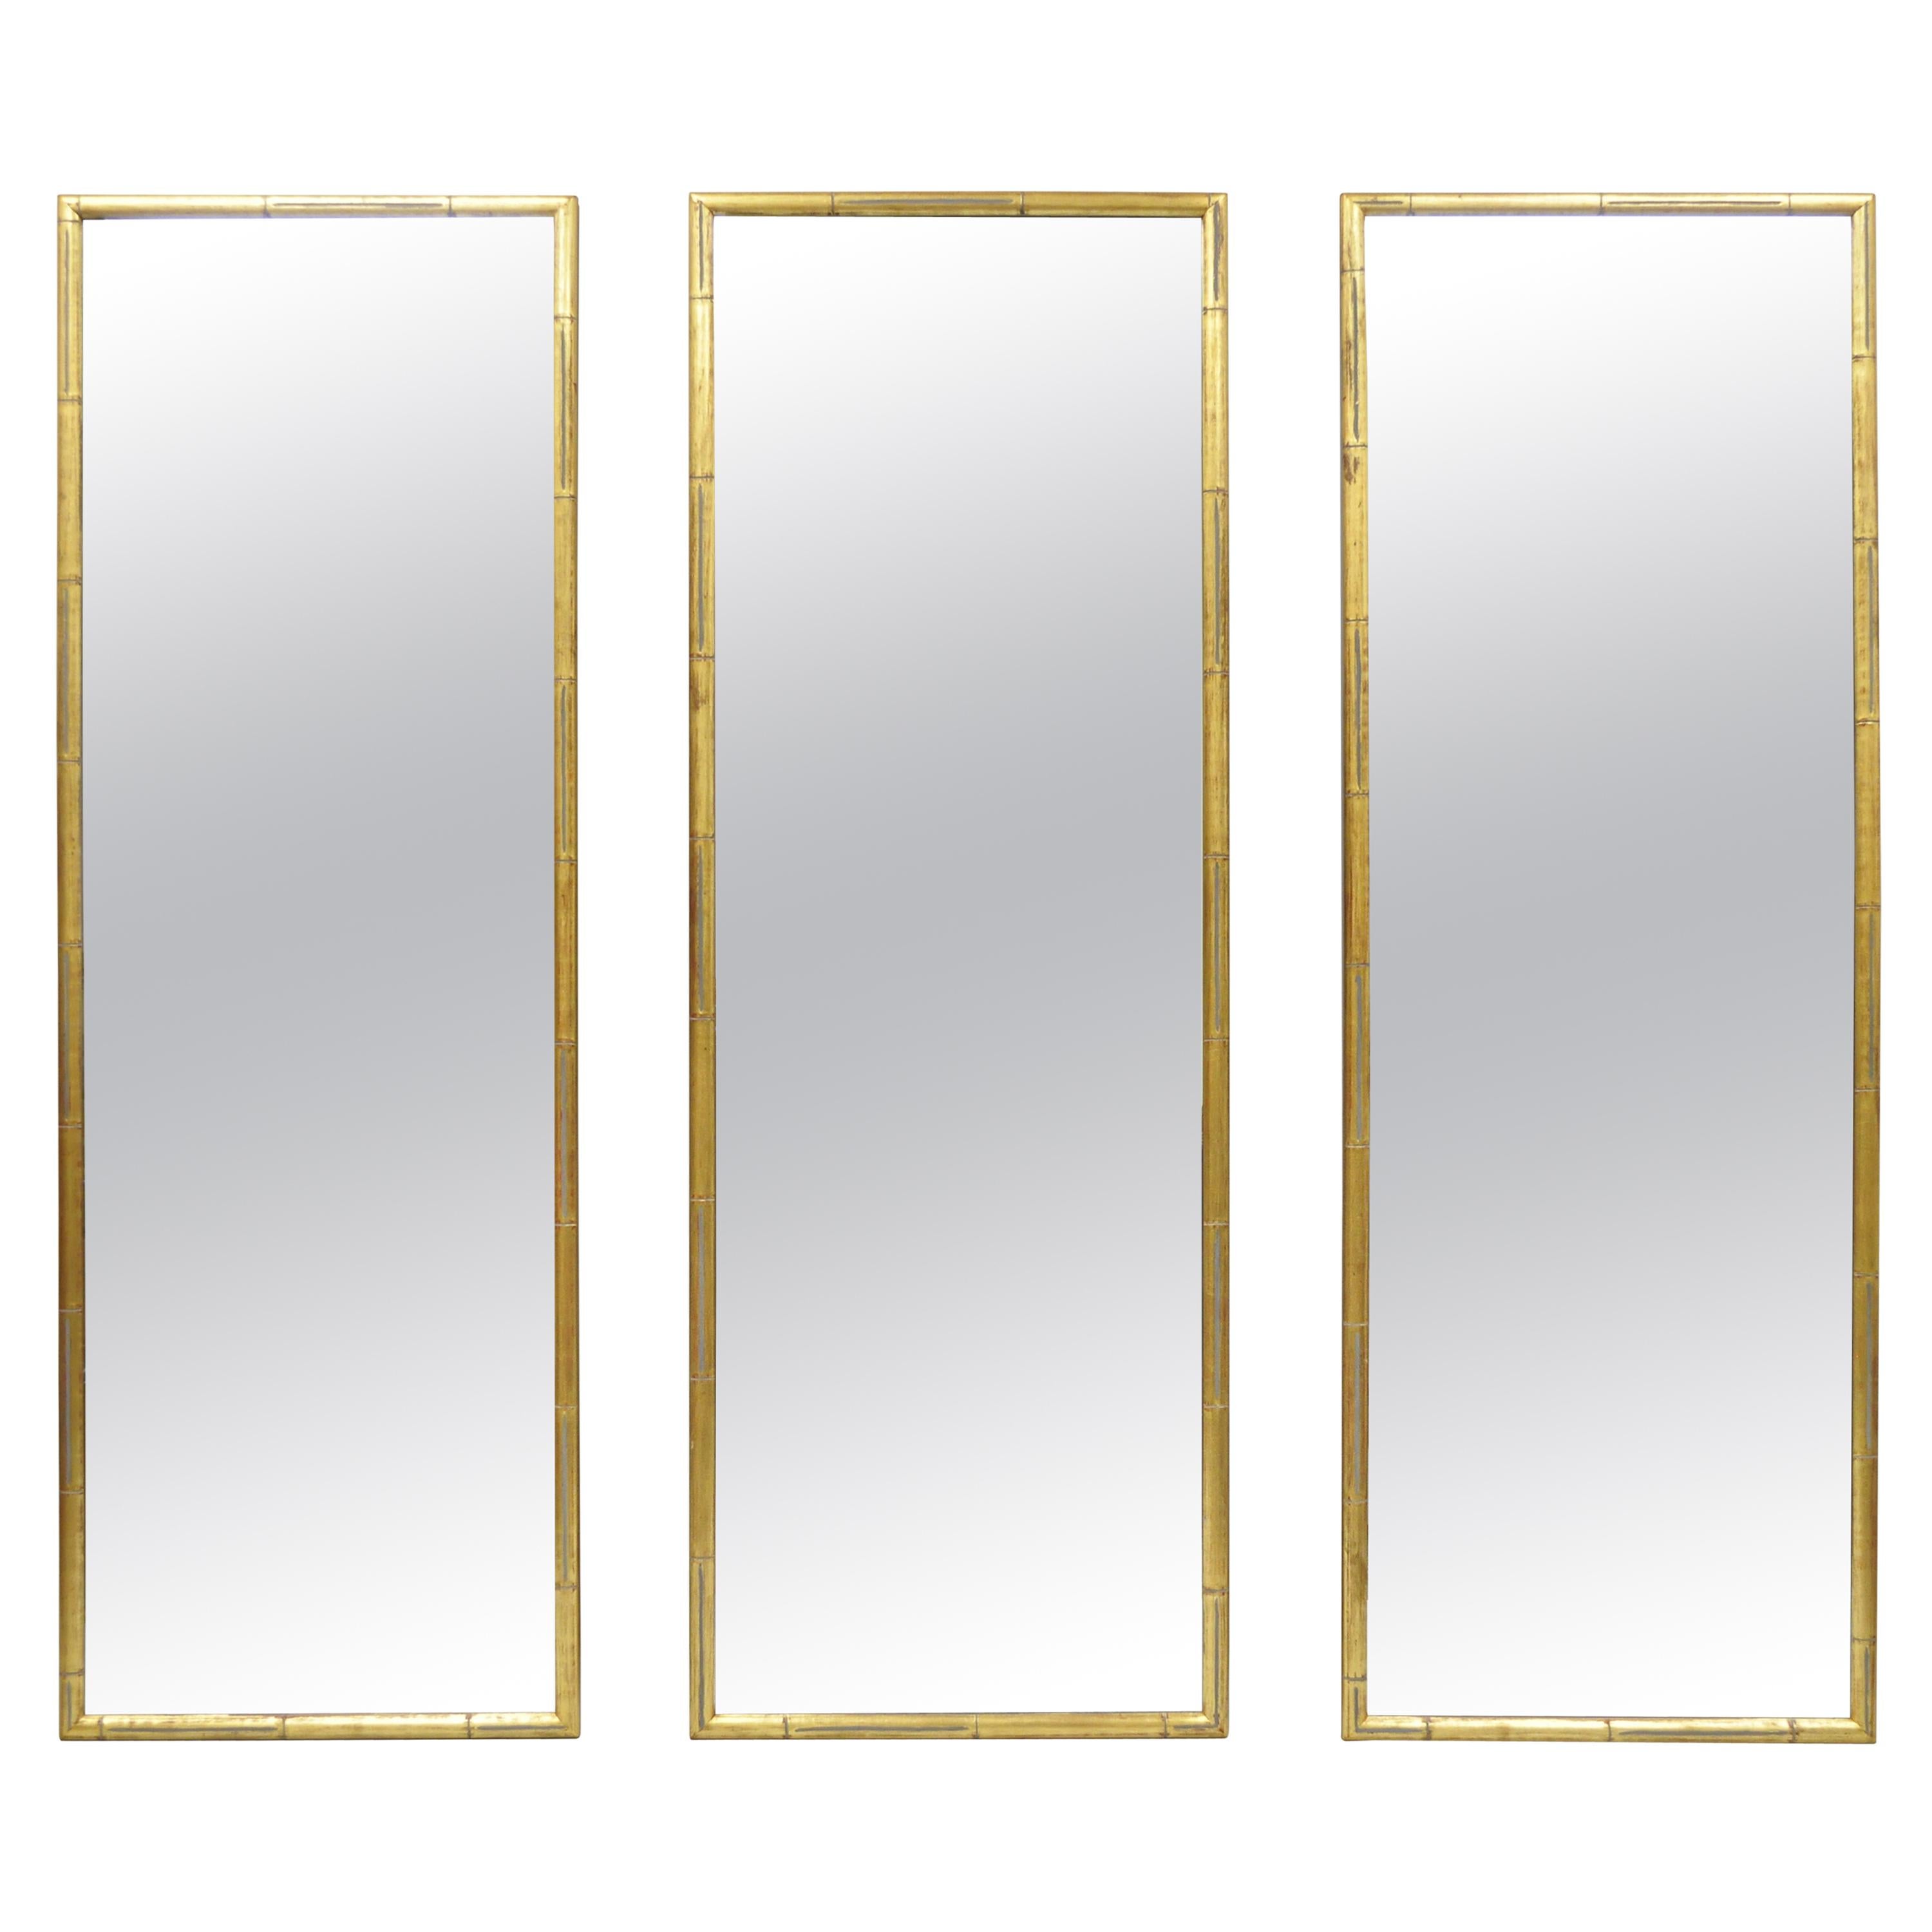 3 Vintage Italian Hollywood Regency Faux Bamboo Wood Frame Gold Wall Mirrors